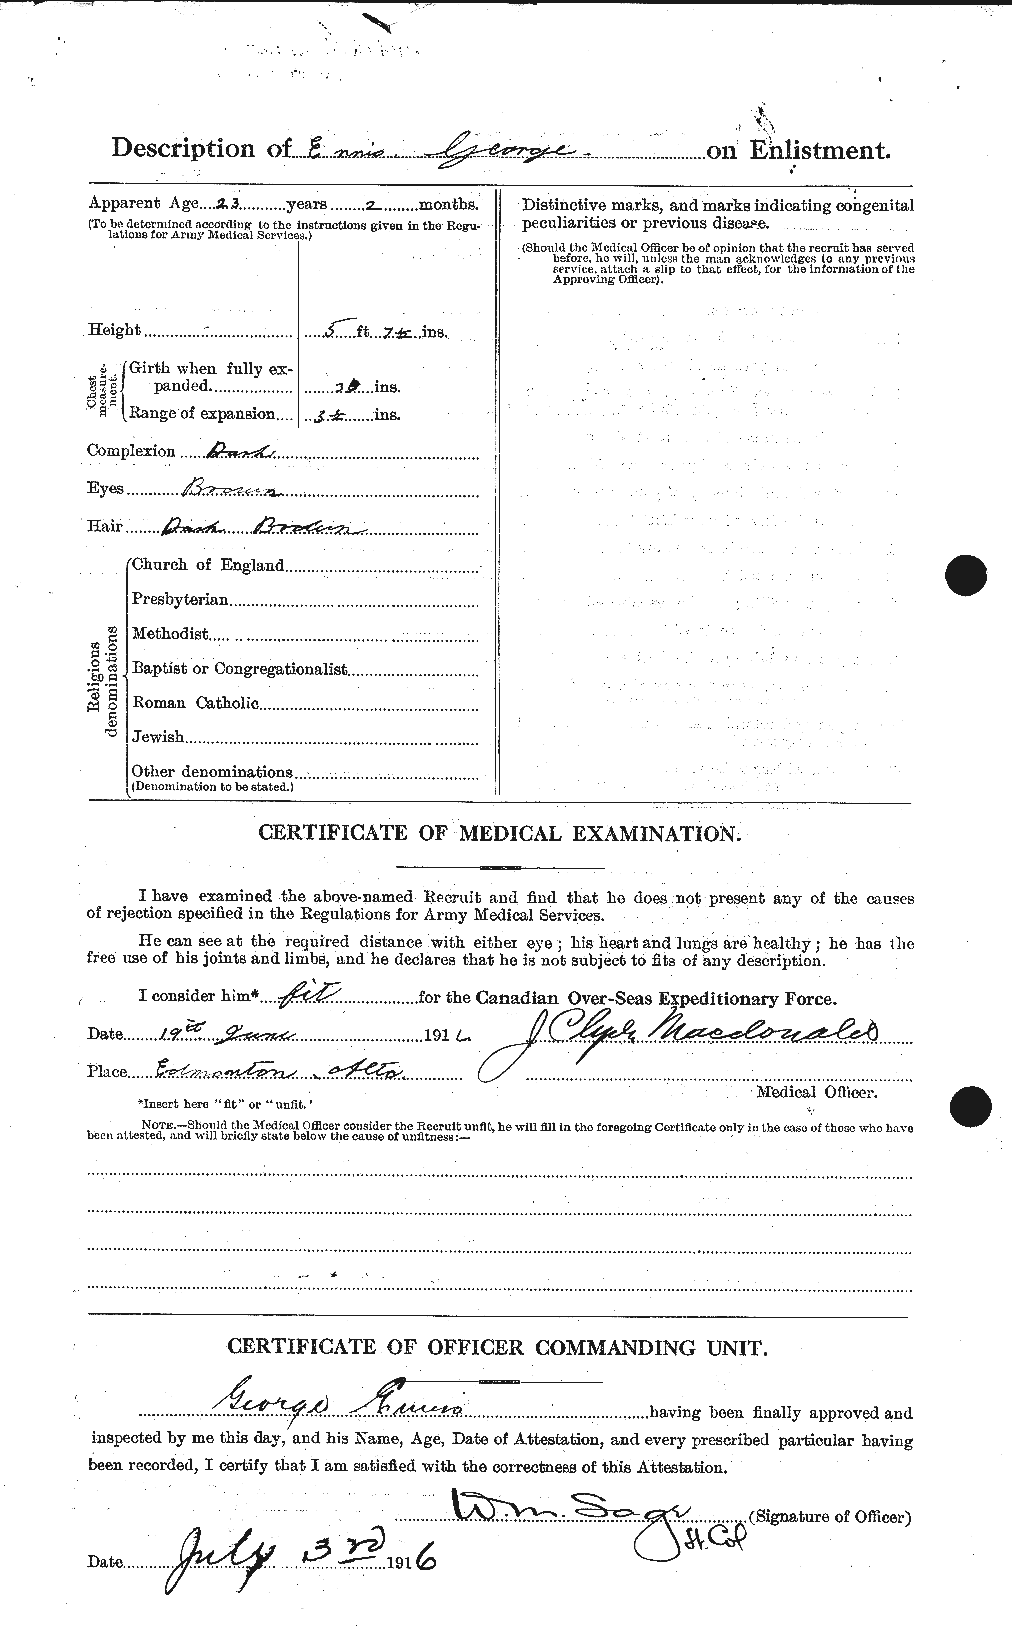 Personnel Records of the First World War - CEF 317317b